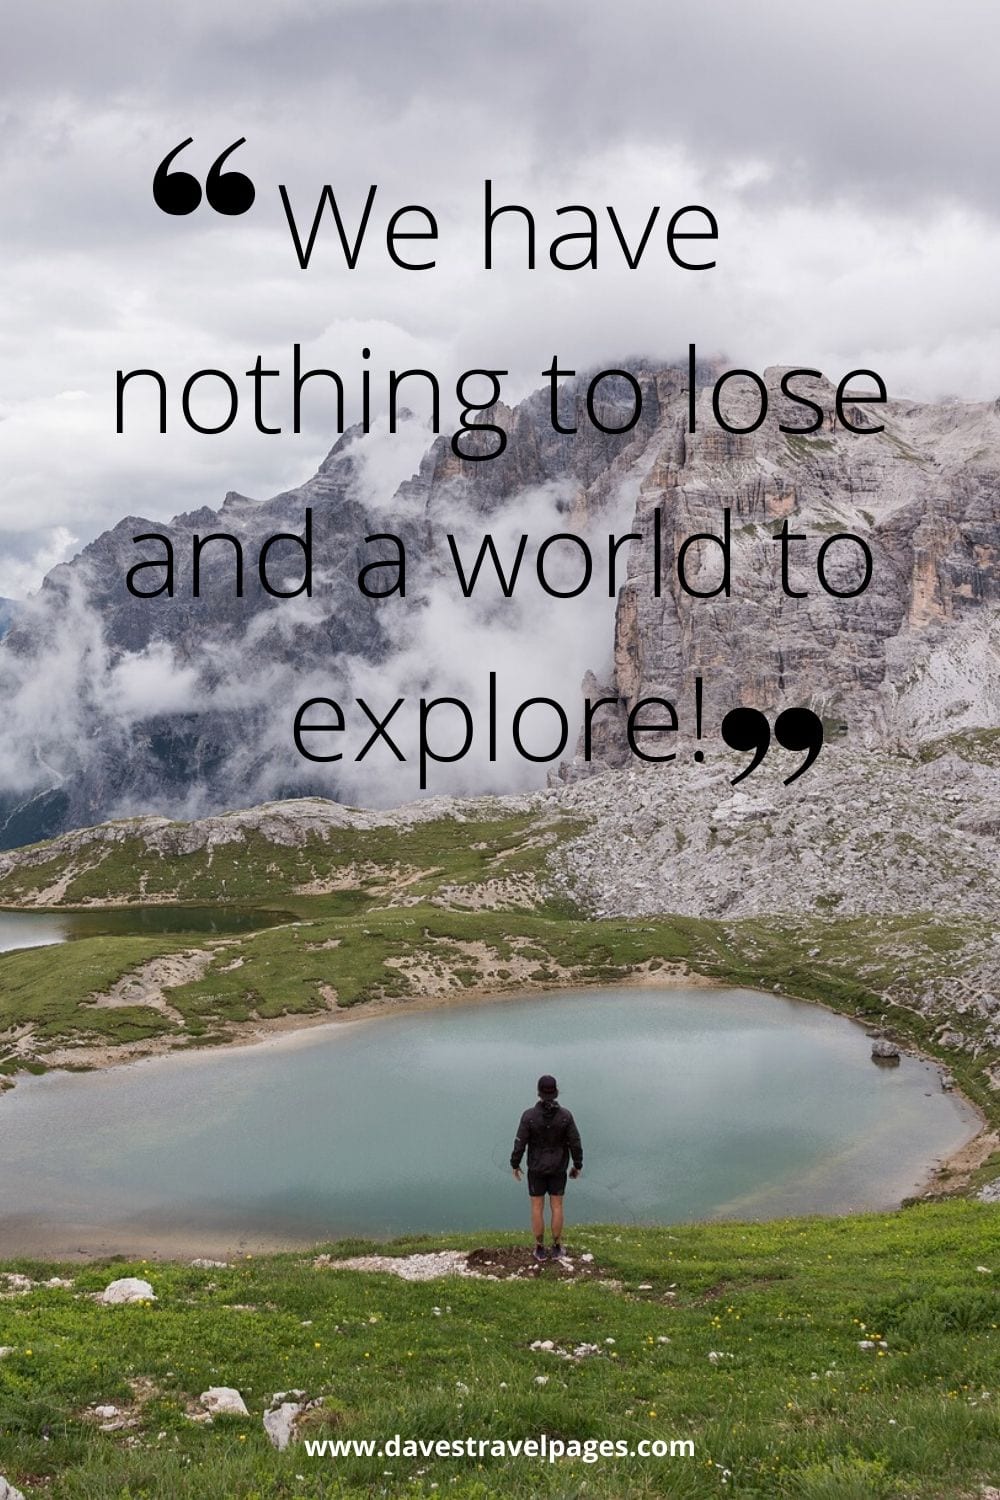 Quotes about Exploring and Adventure: We have nothing to lose and a world to explore!